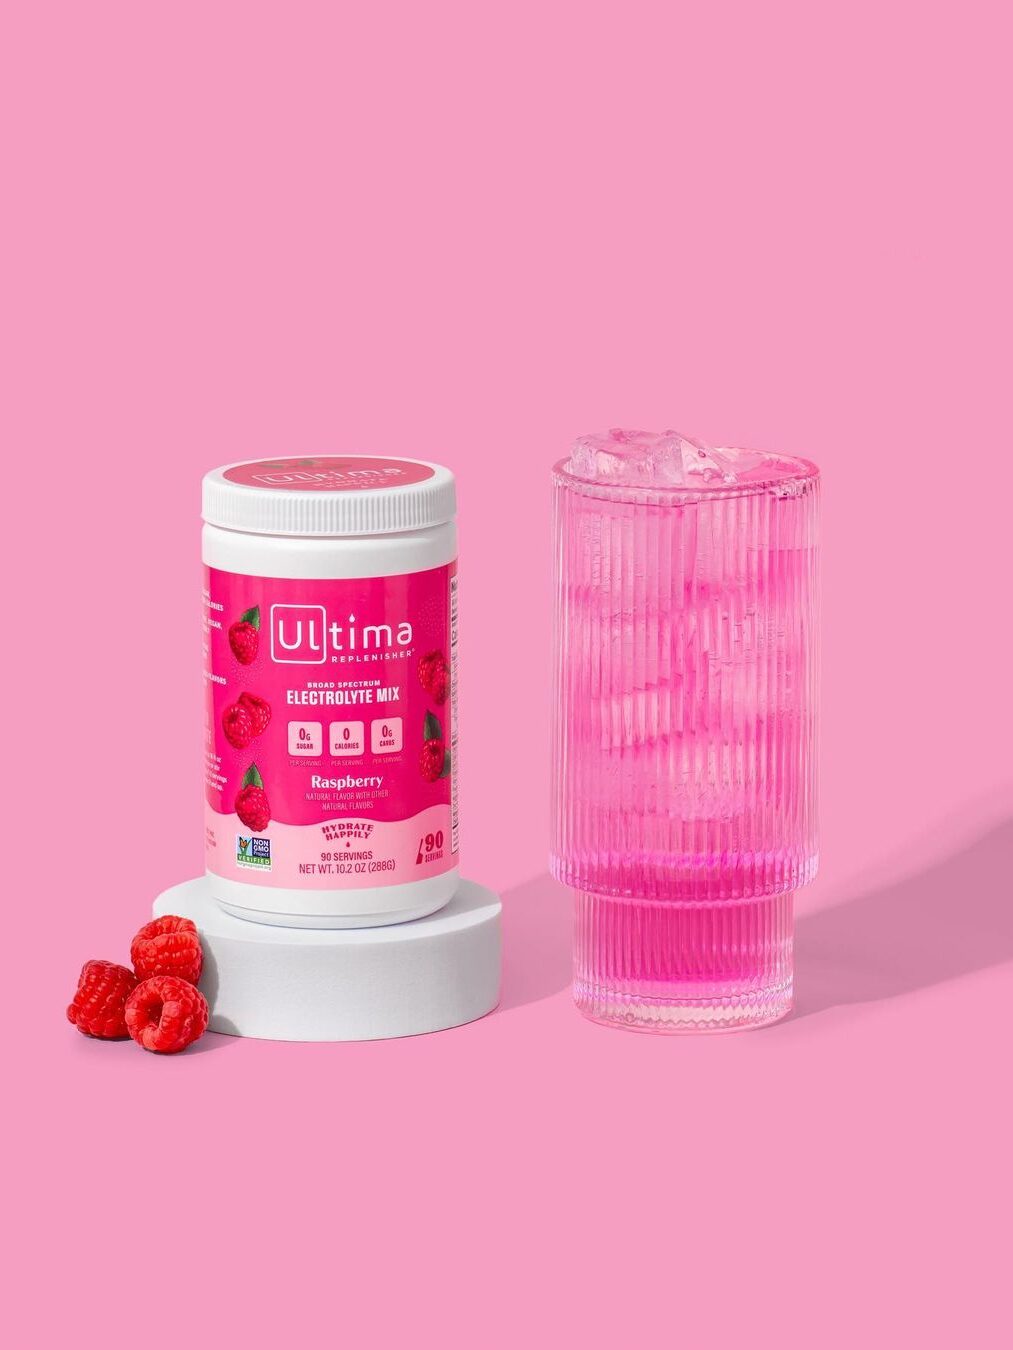 A container of Ultima Raspberry Electrolyte powder on a stand next to a tall glass of the ready-made electrolye drink.